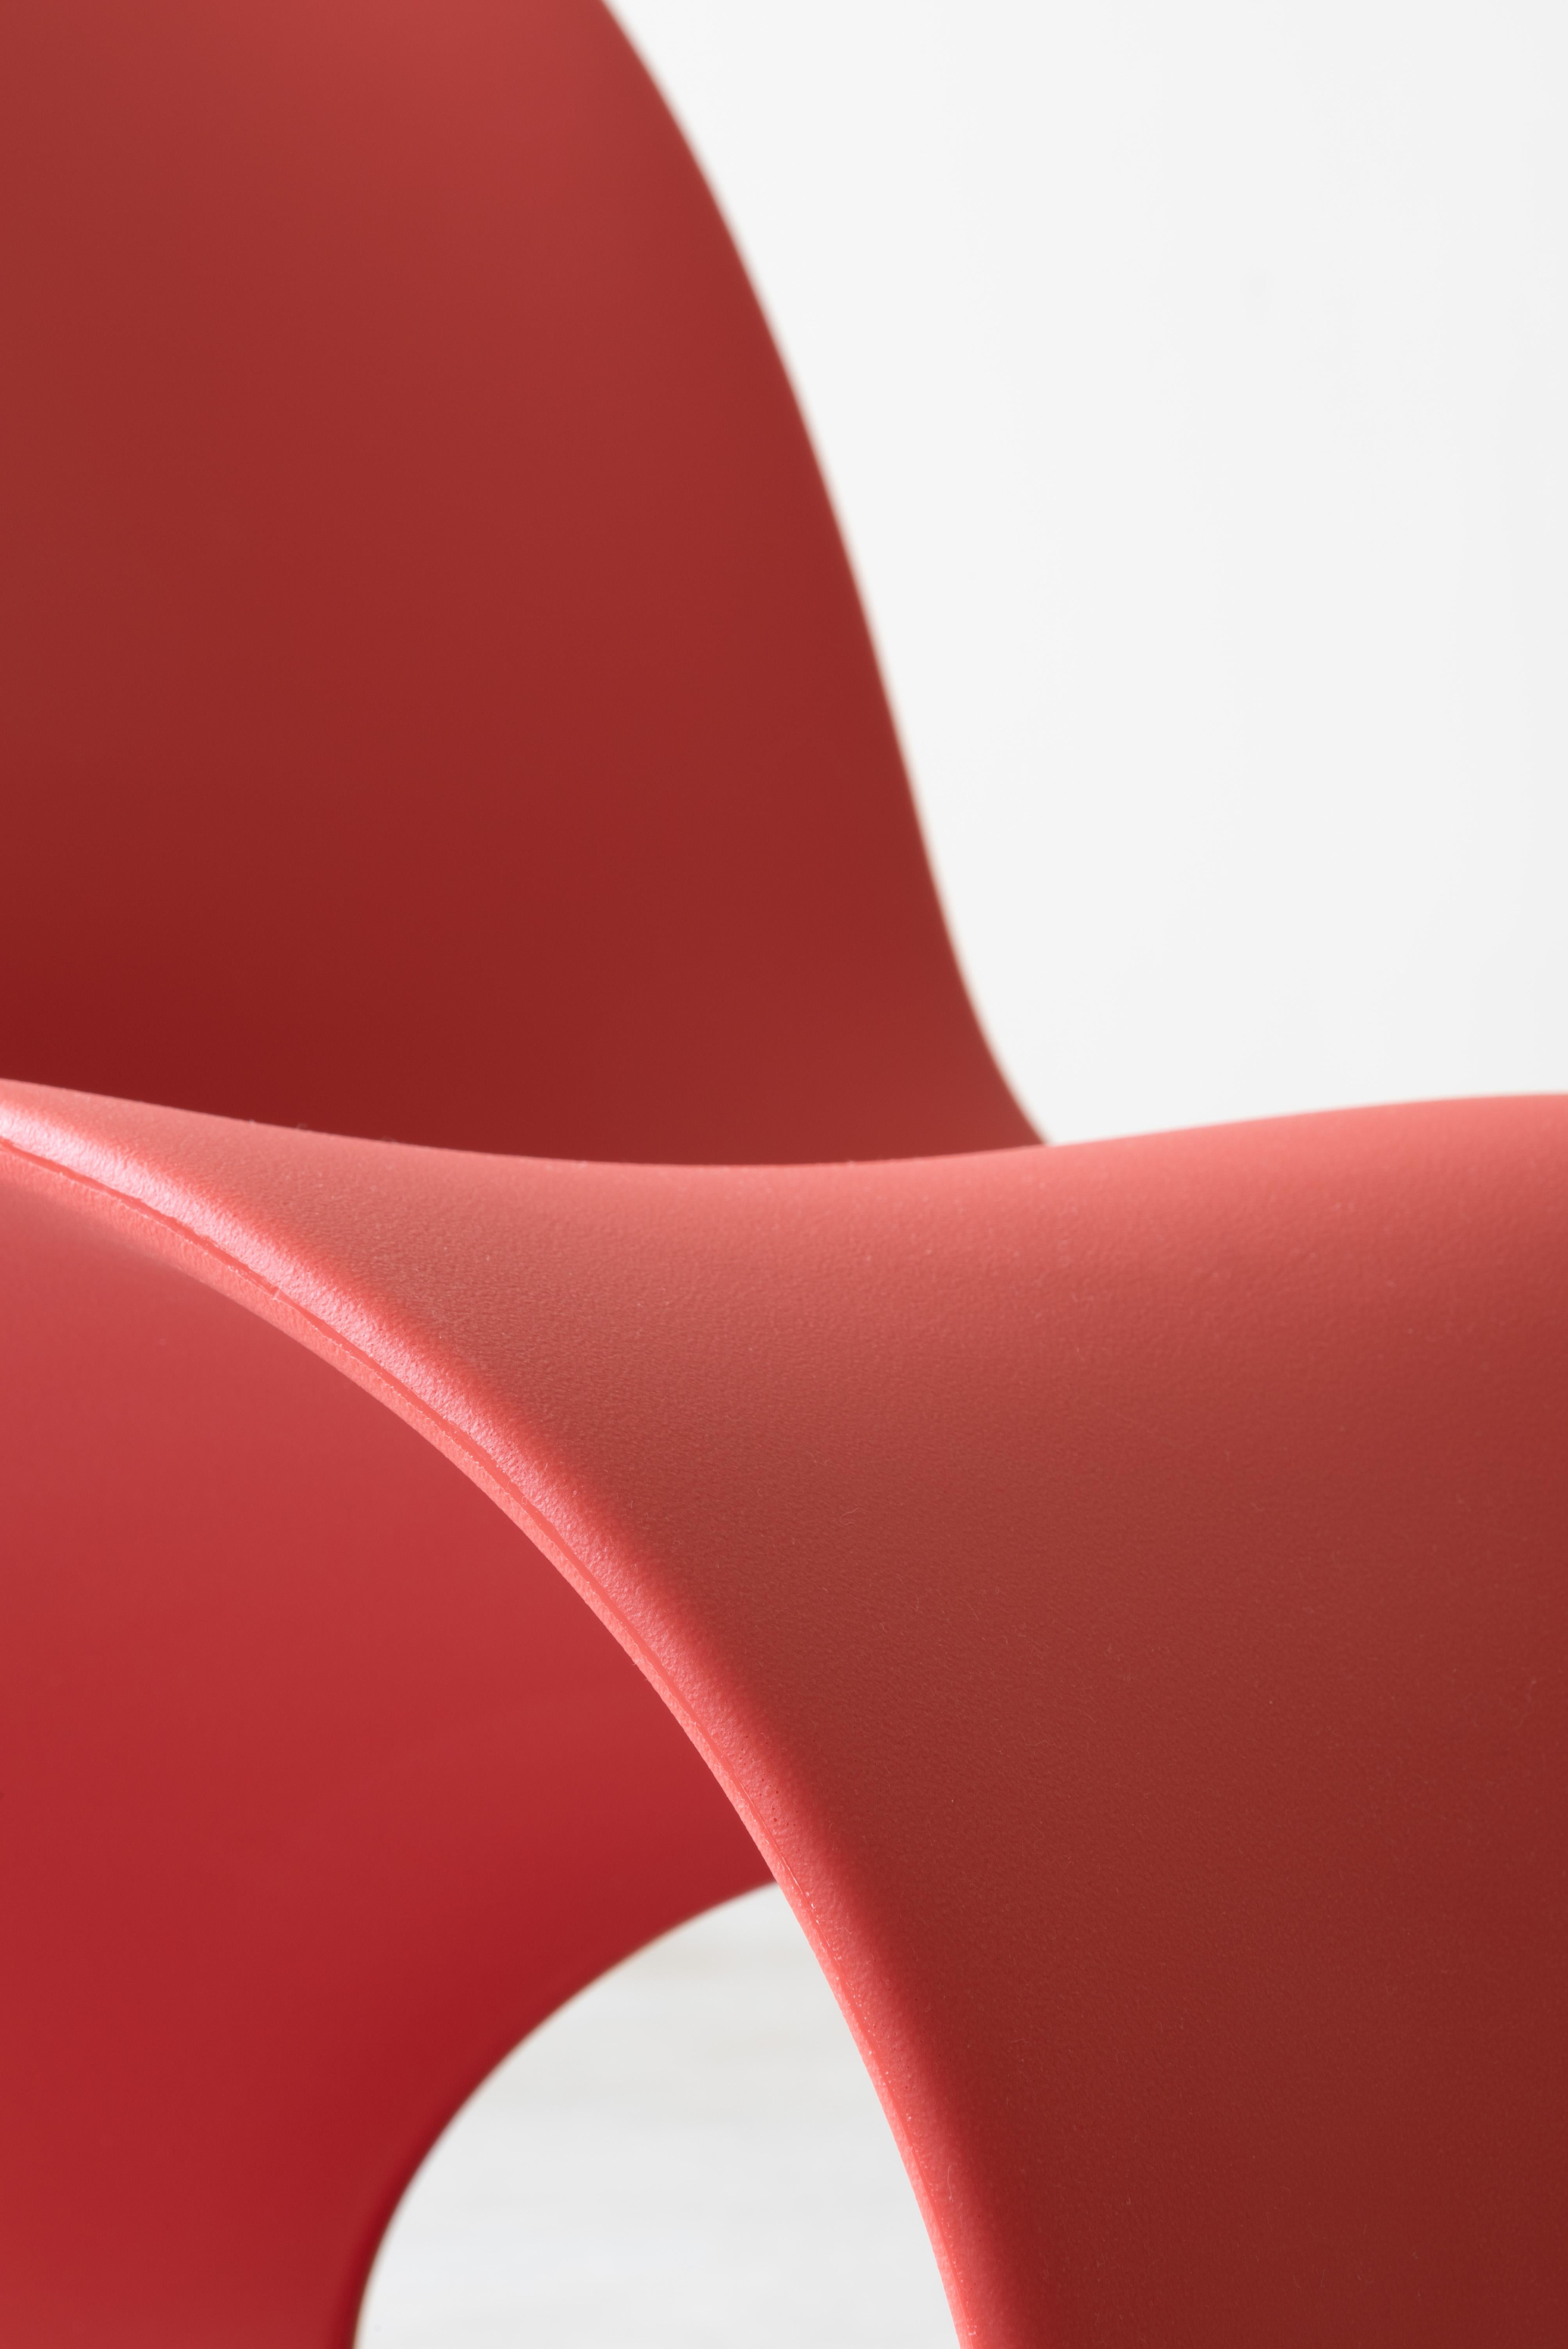 Voido Rocking Chair  in Red by Ron Arad for MAGIS In New Condition For Sale In Brooklyn, NY